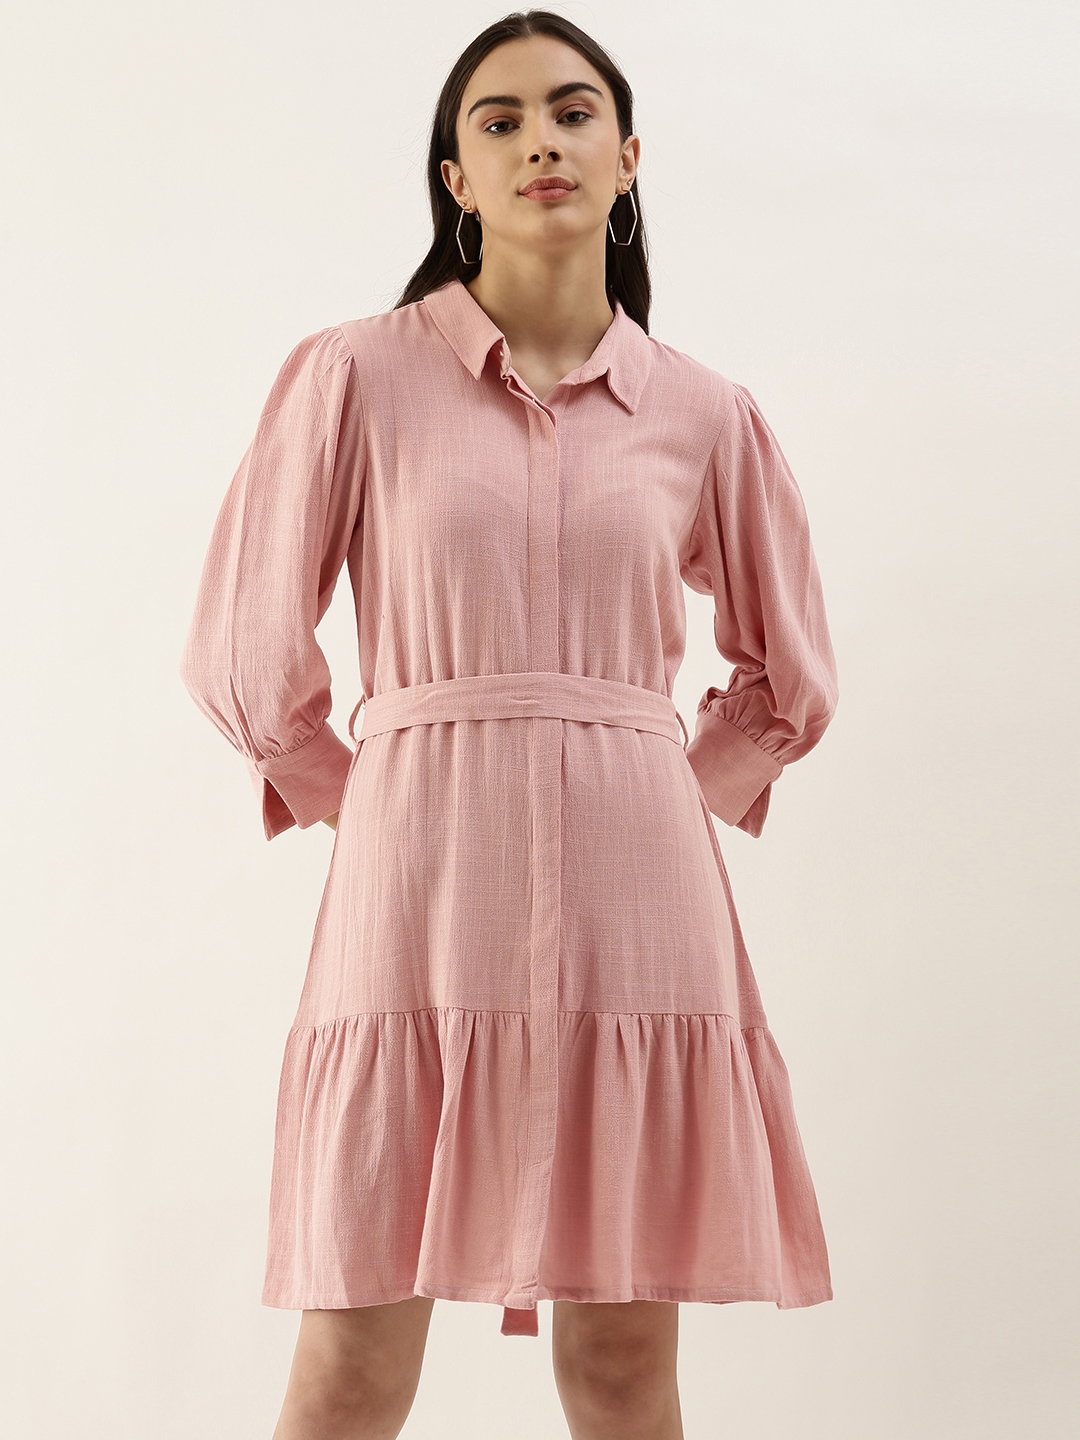 AND Wome Pink Solid A-Line Dress